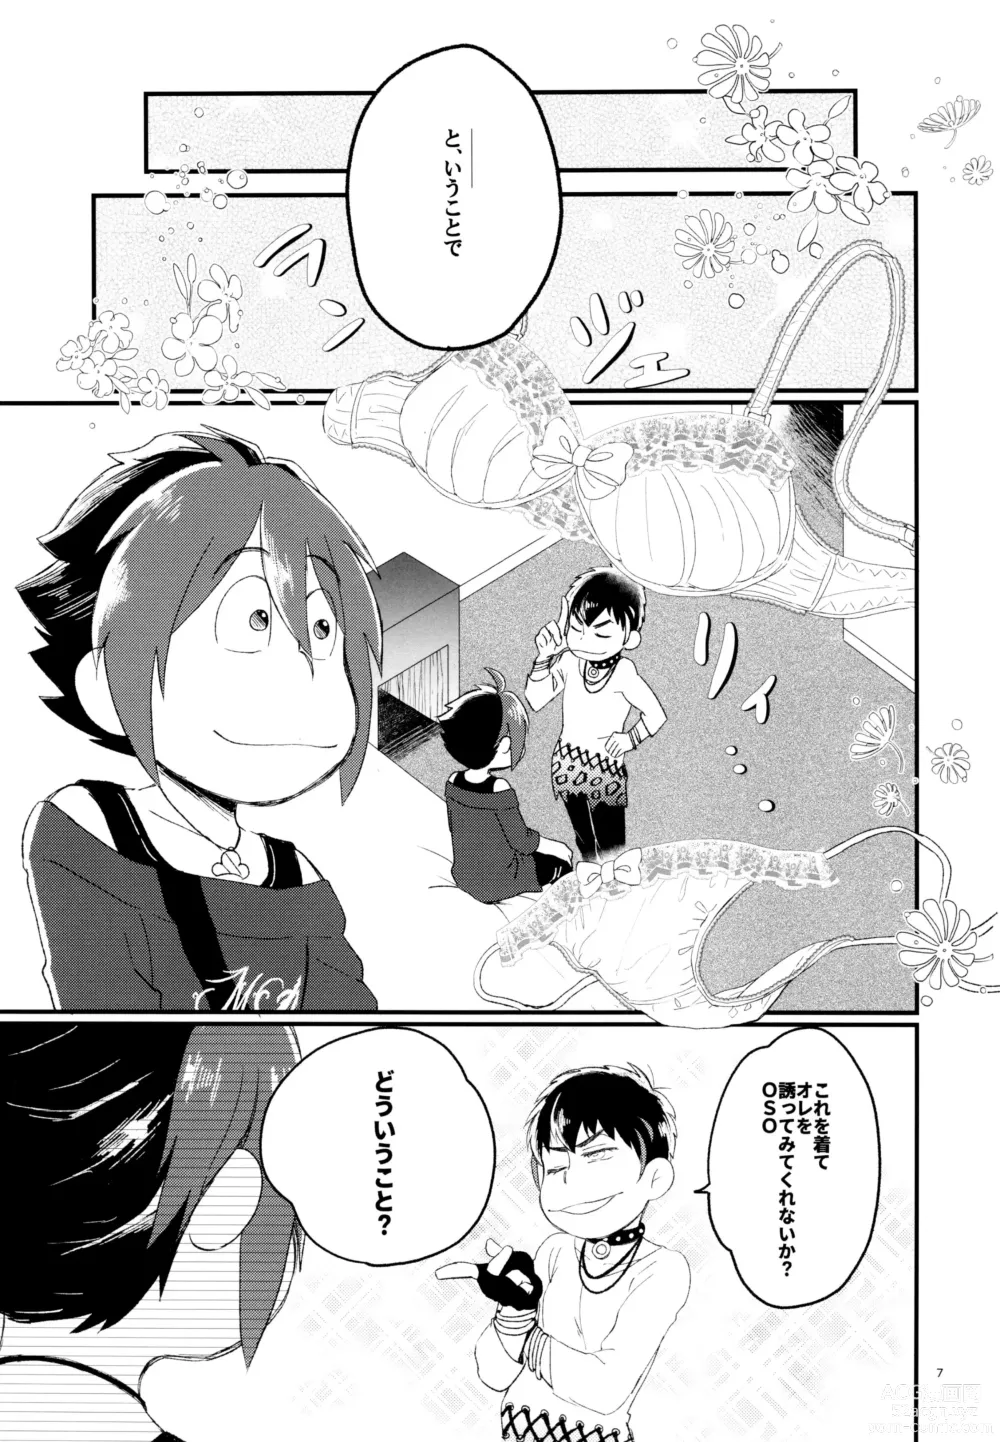 Page 7 of doujinshi A book where OSO seals away the pain of Kara and graduates from virginity.